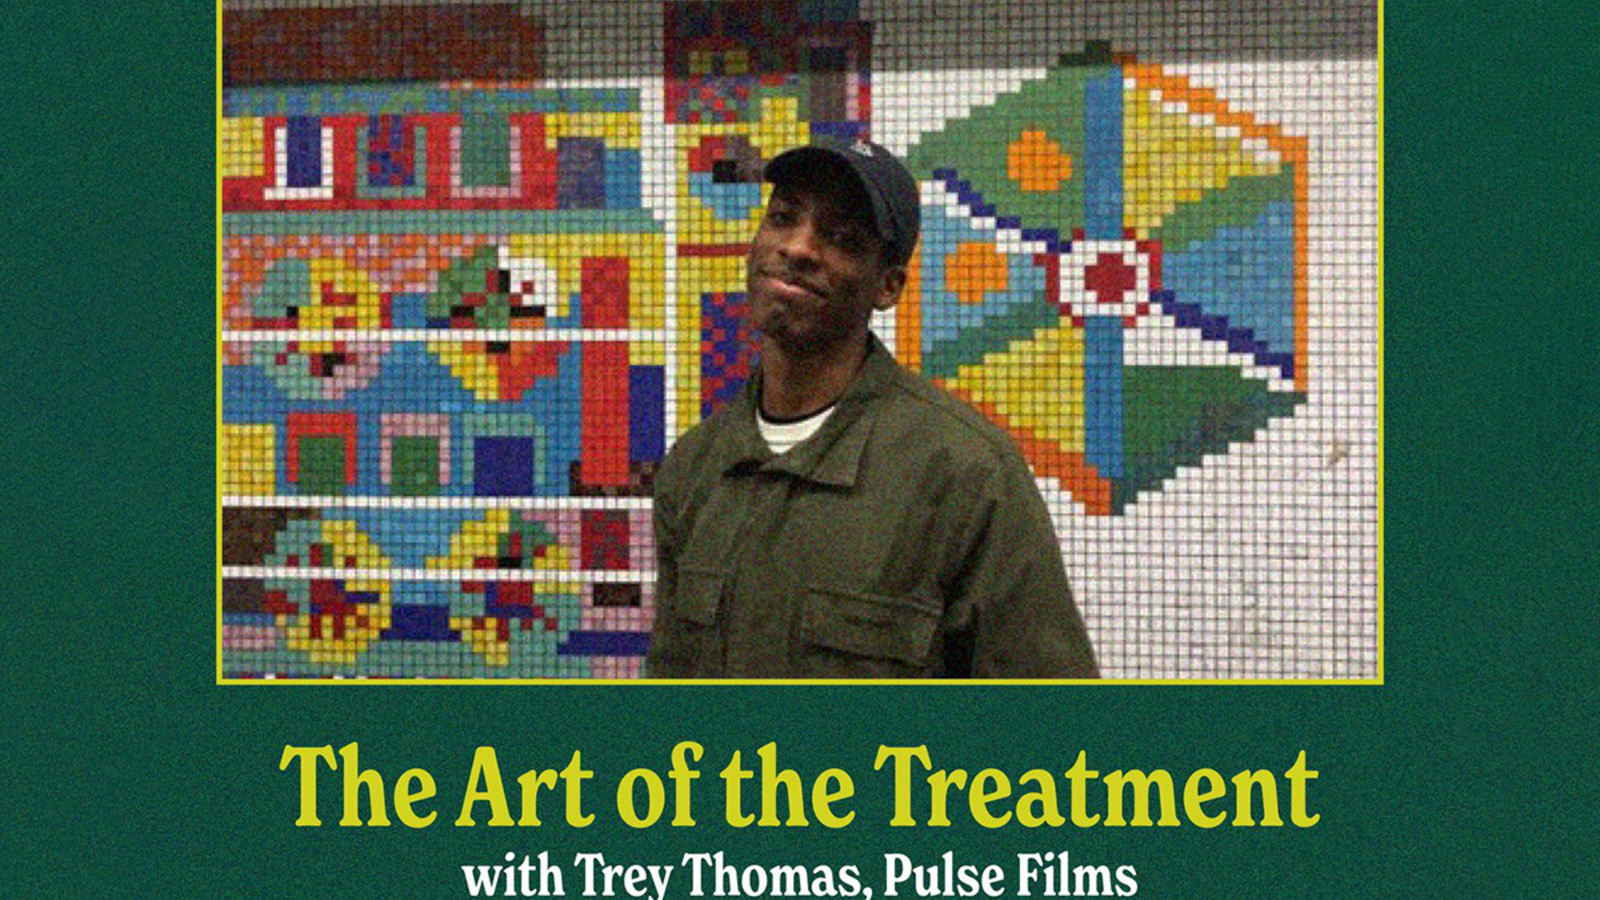 Graphic shows a headshot of Trey Thomas with the text: The Art of the Treatment with Trey Thomas, Pulse Films